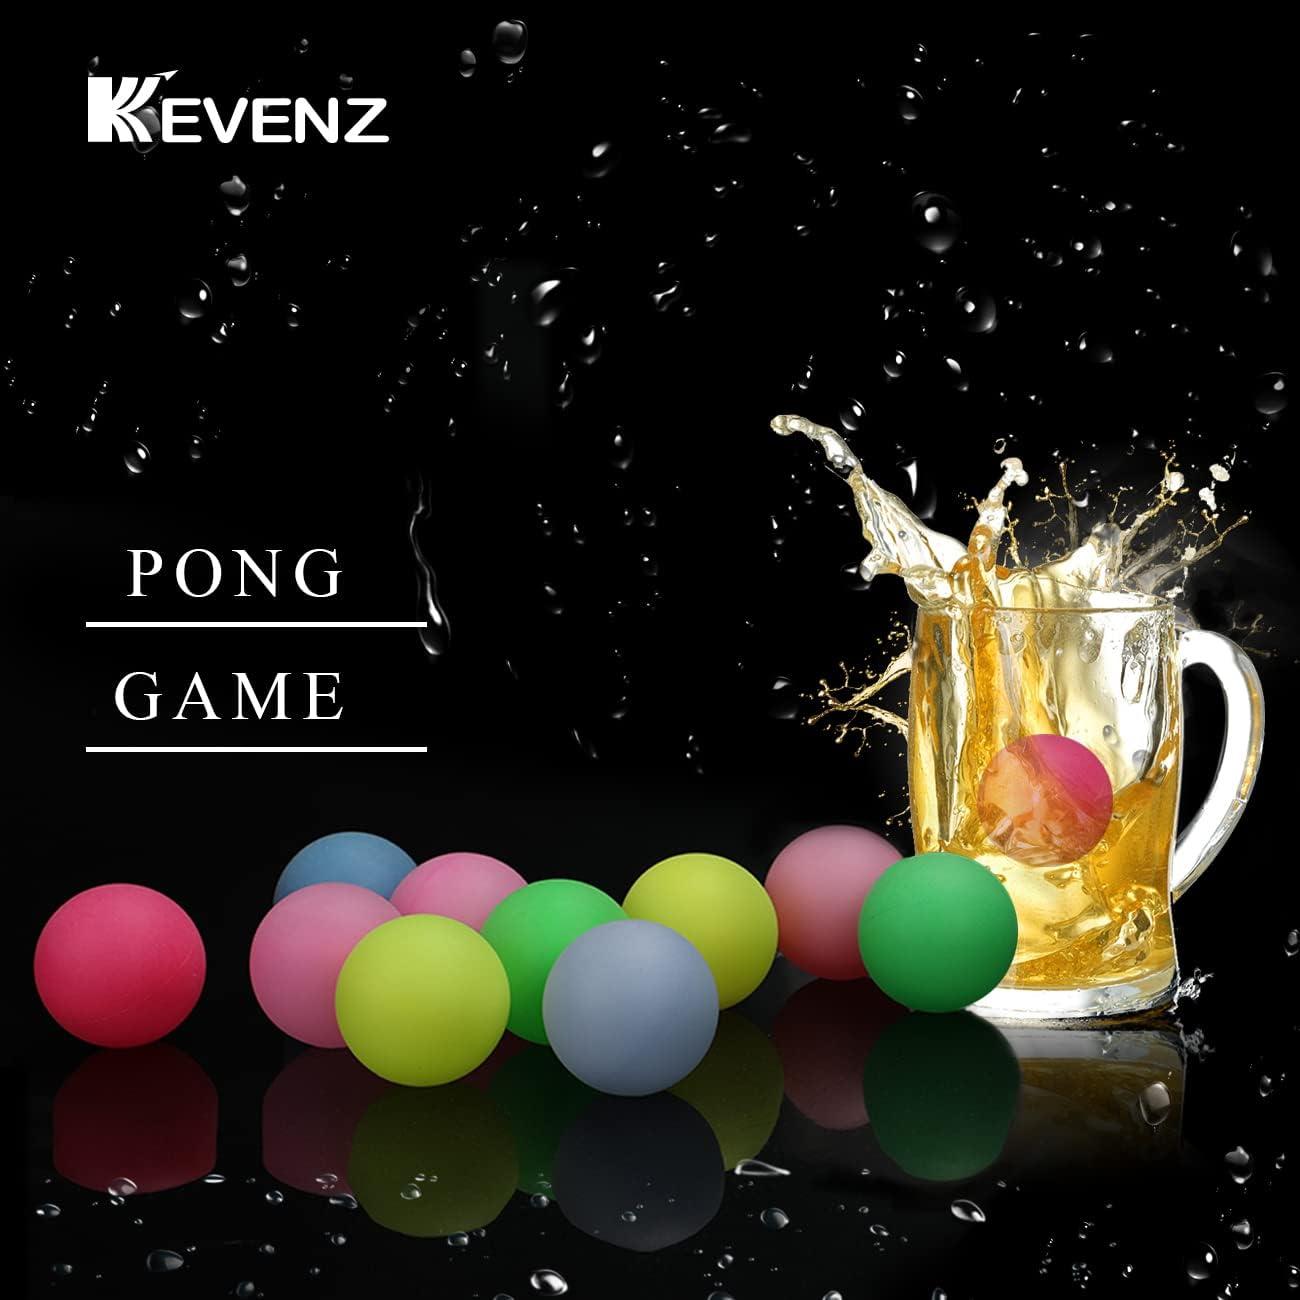 100 Pack Multi-Colored Ping Pong Balls 